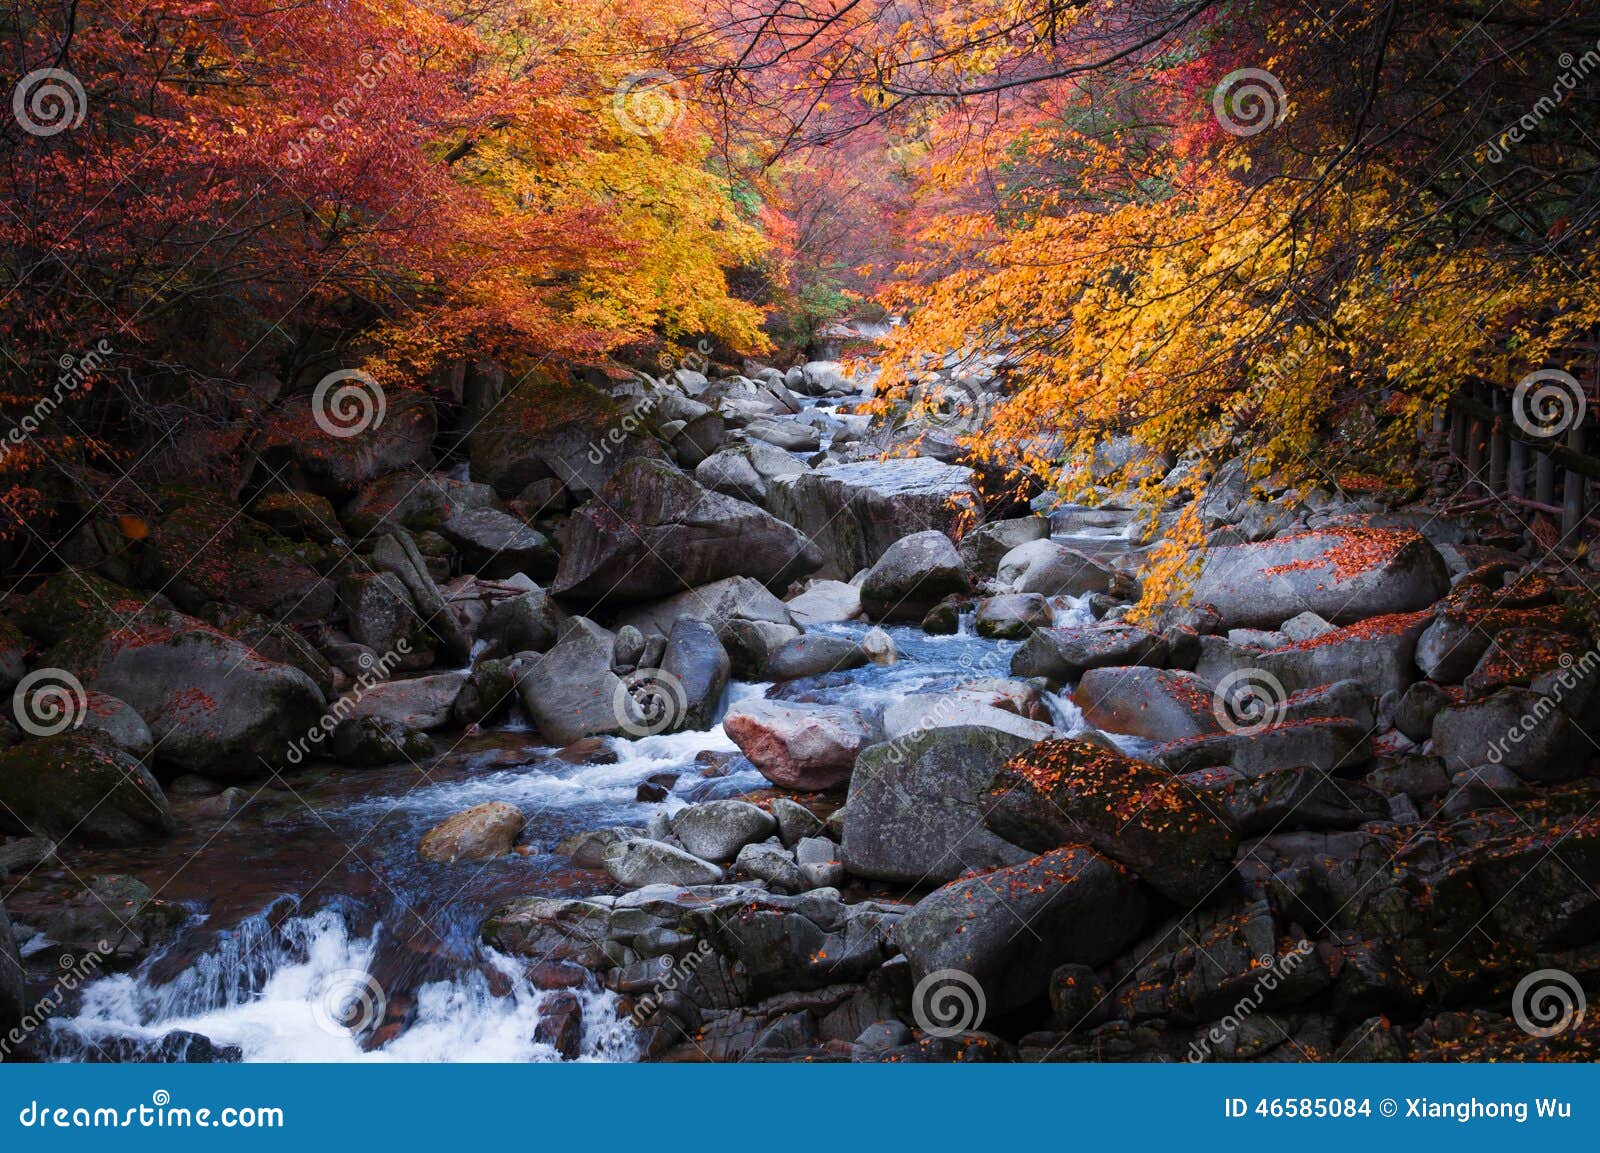 stream in golden fall forest